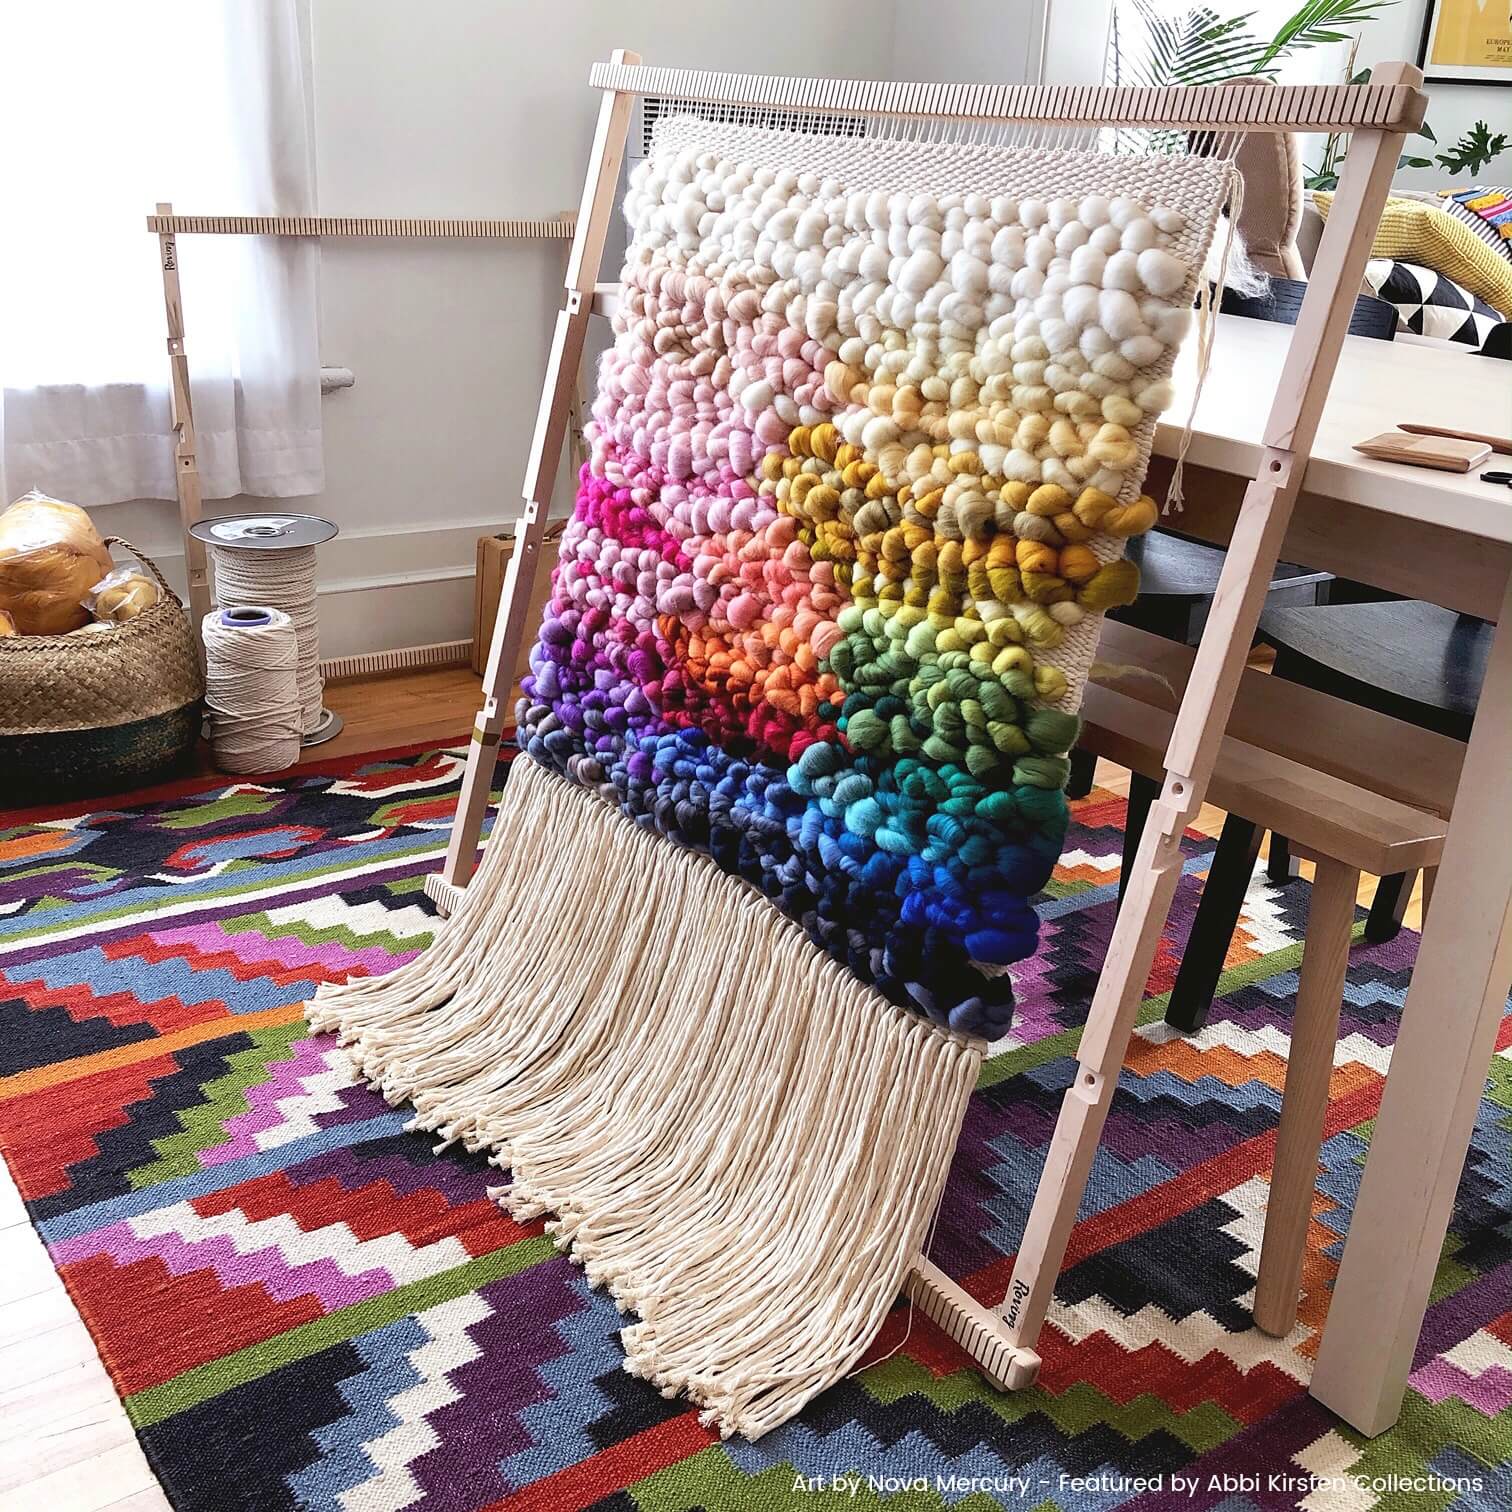 An in-progress macrame wall hanging hangs from a weaving loom while being made in a home craft room. This wall hanging features a rainbow patters, with colorful threads ranging from whites and creams to rich shades of blue and gray.